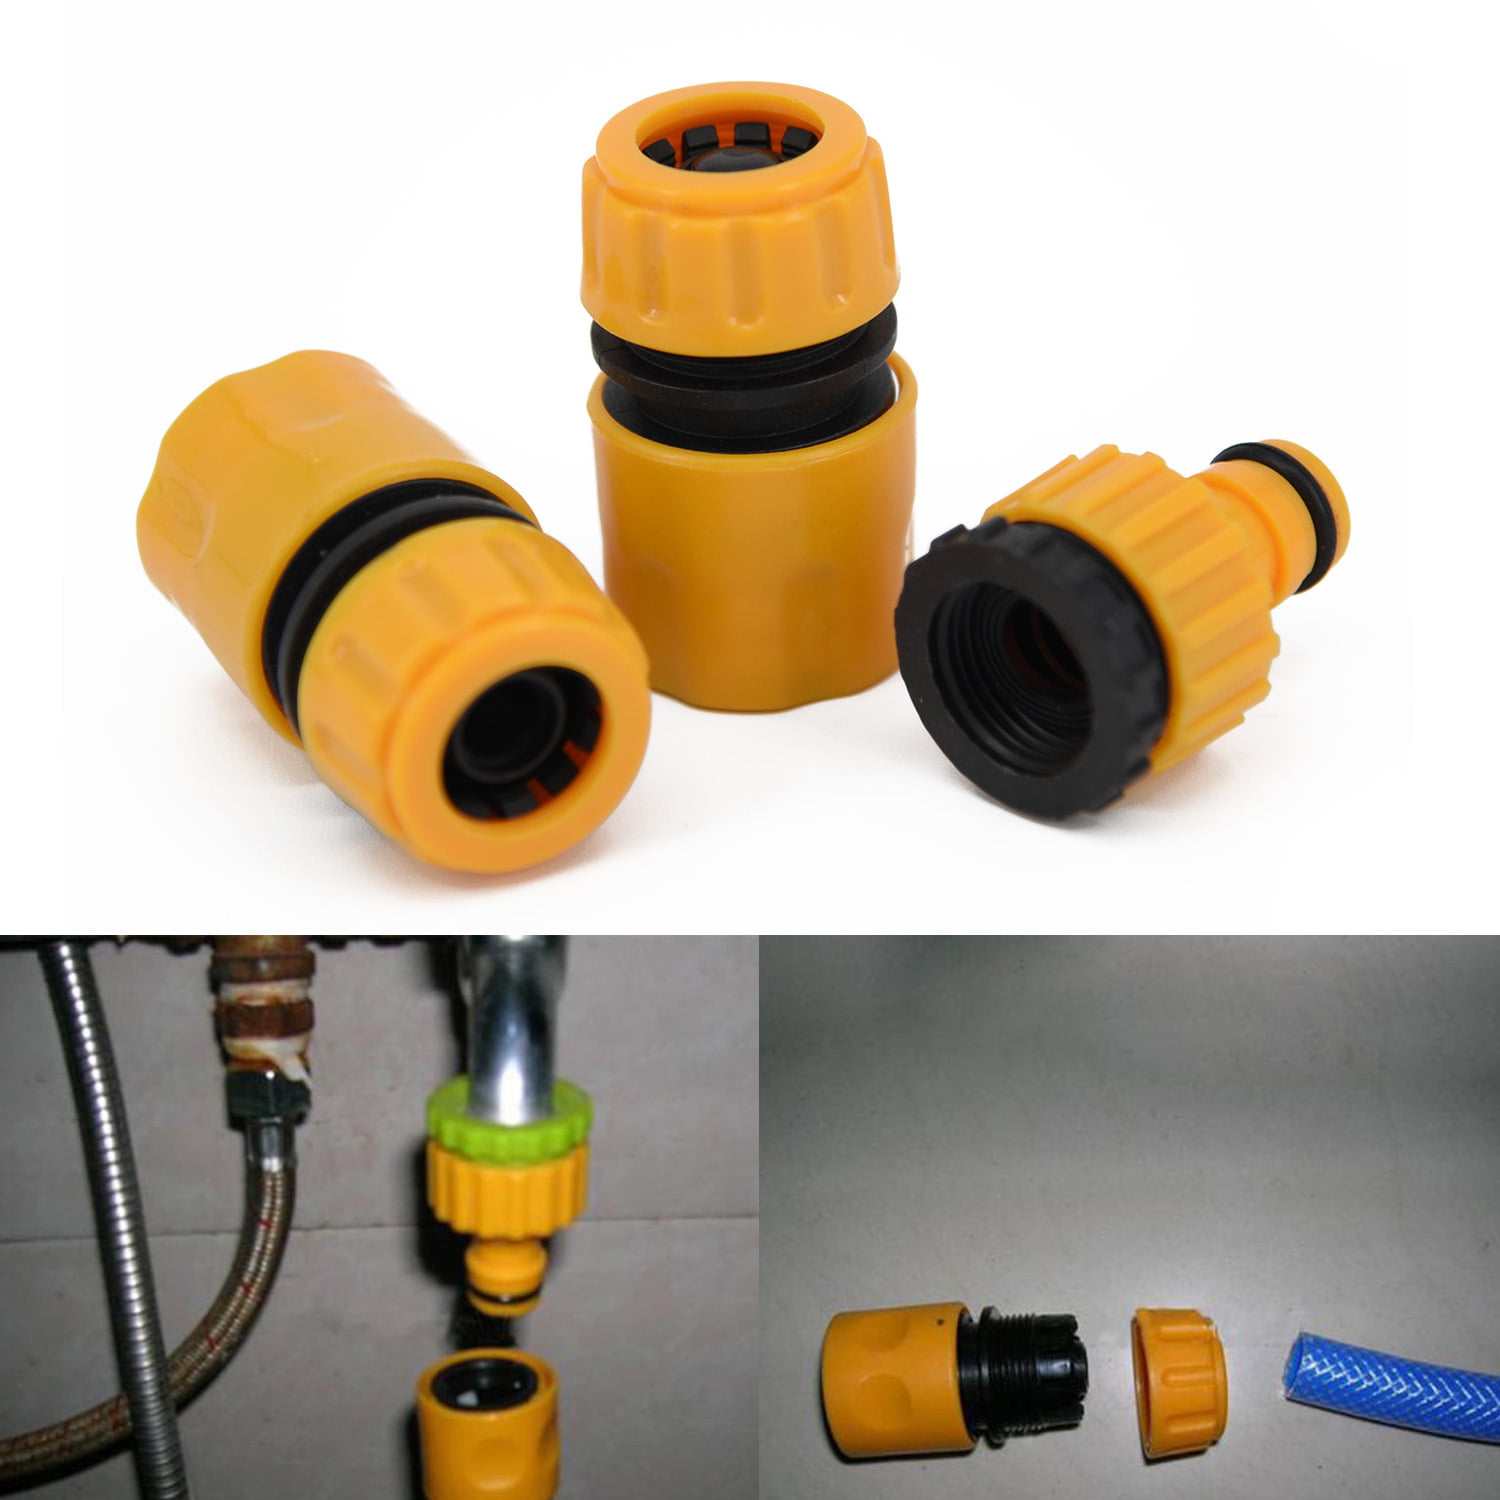 3X 1/2"3/4" Garden Hose Water Pipe Quick Connector Tube Fitting Tap Adapter New 